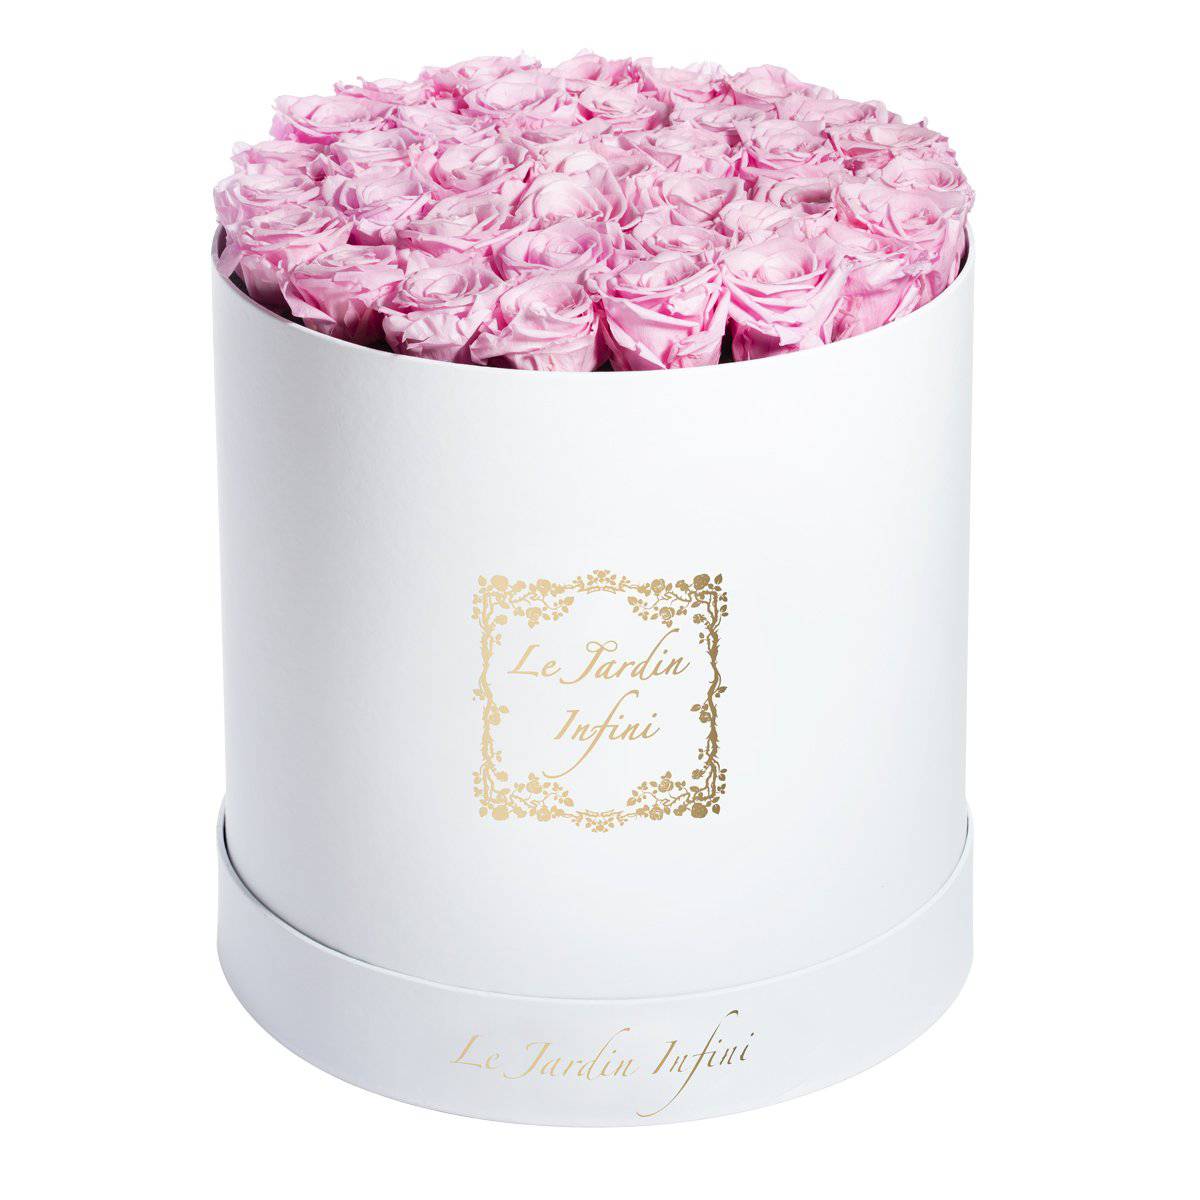 Soft Pink Preserved Roses - Large Round White Box